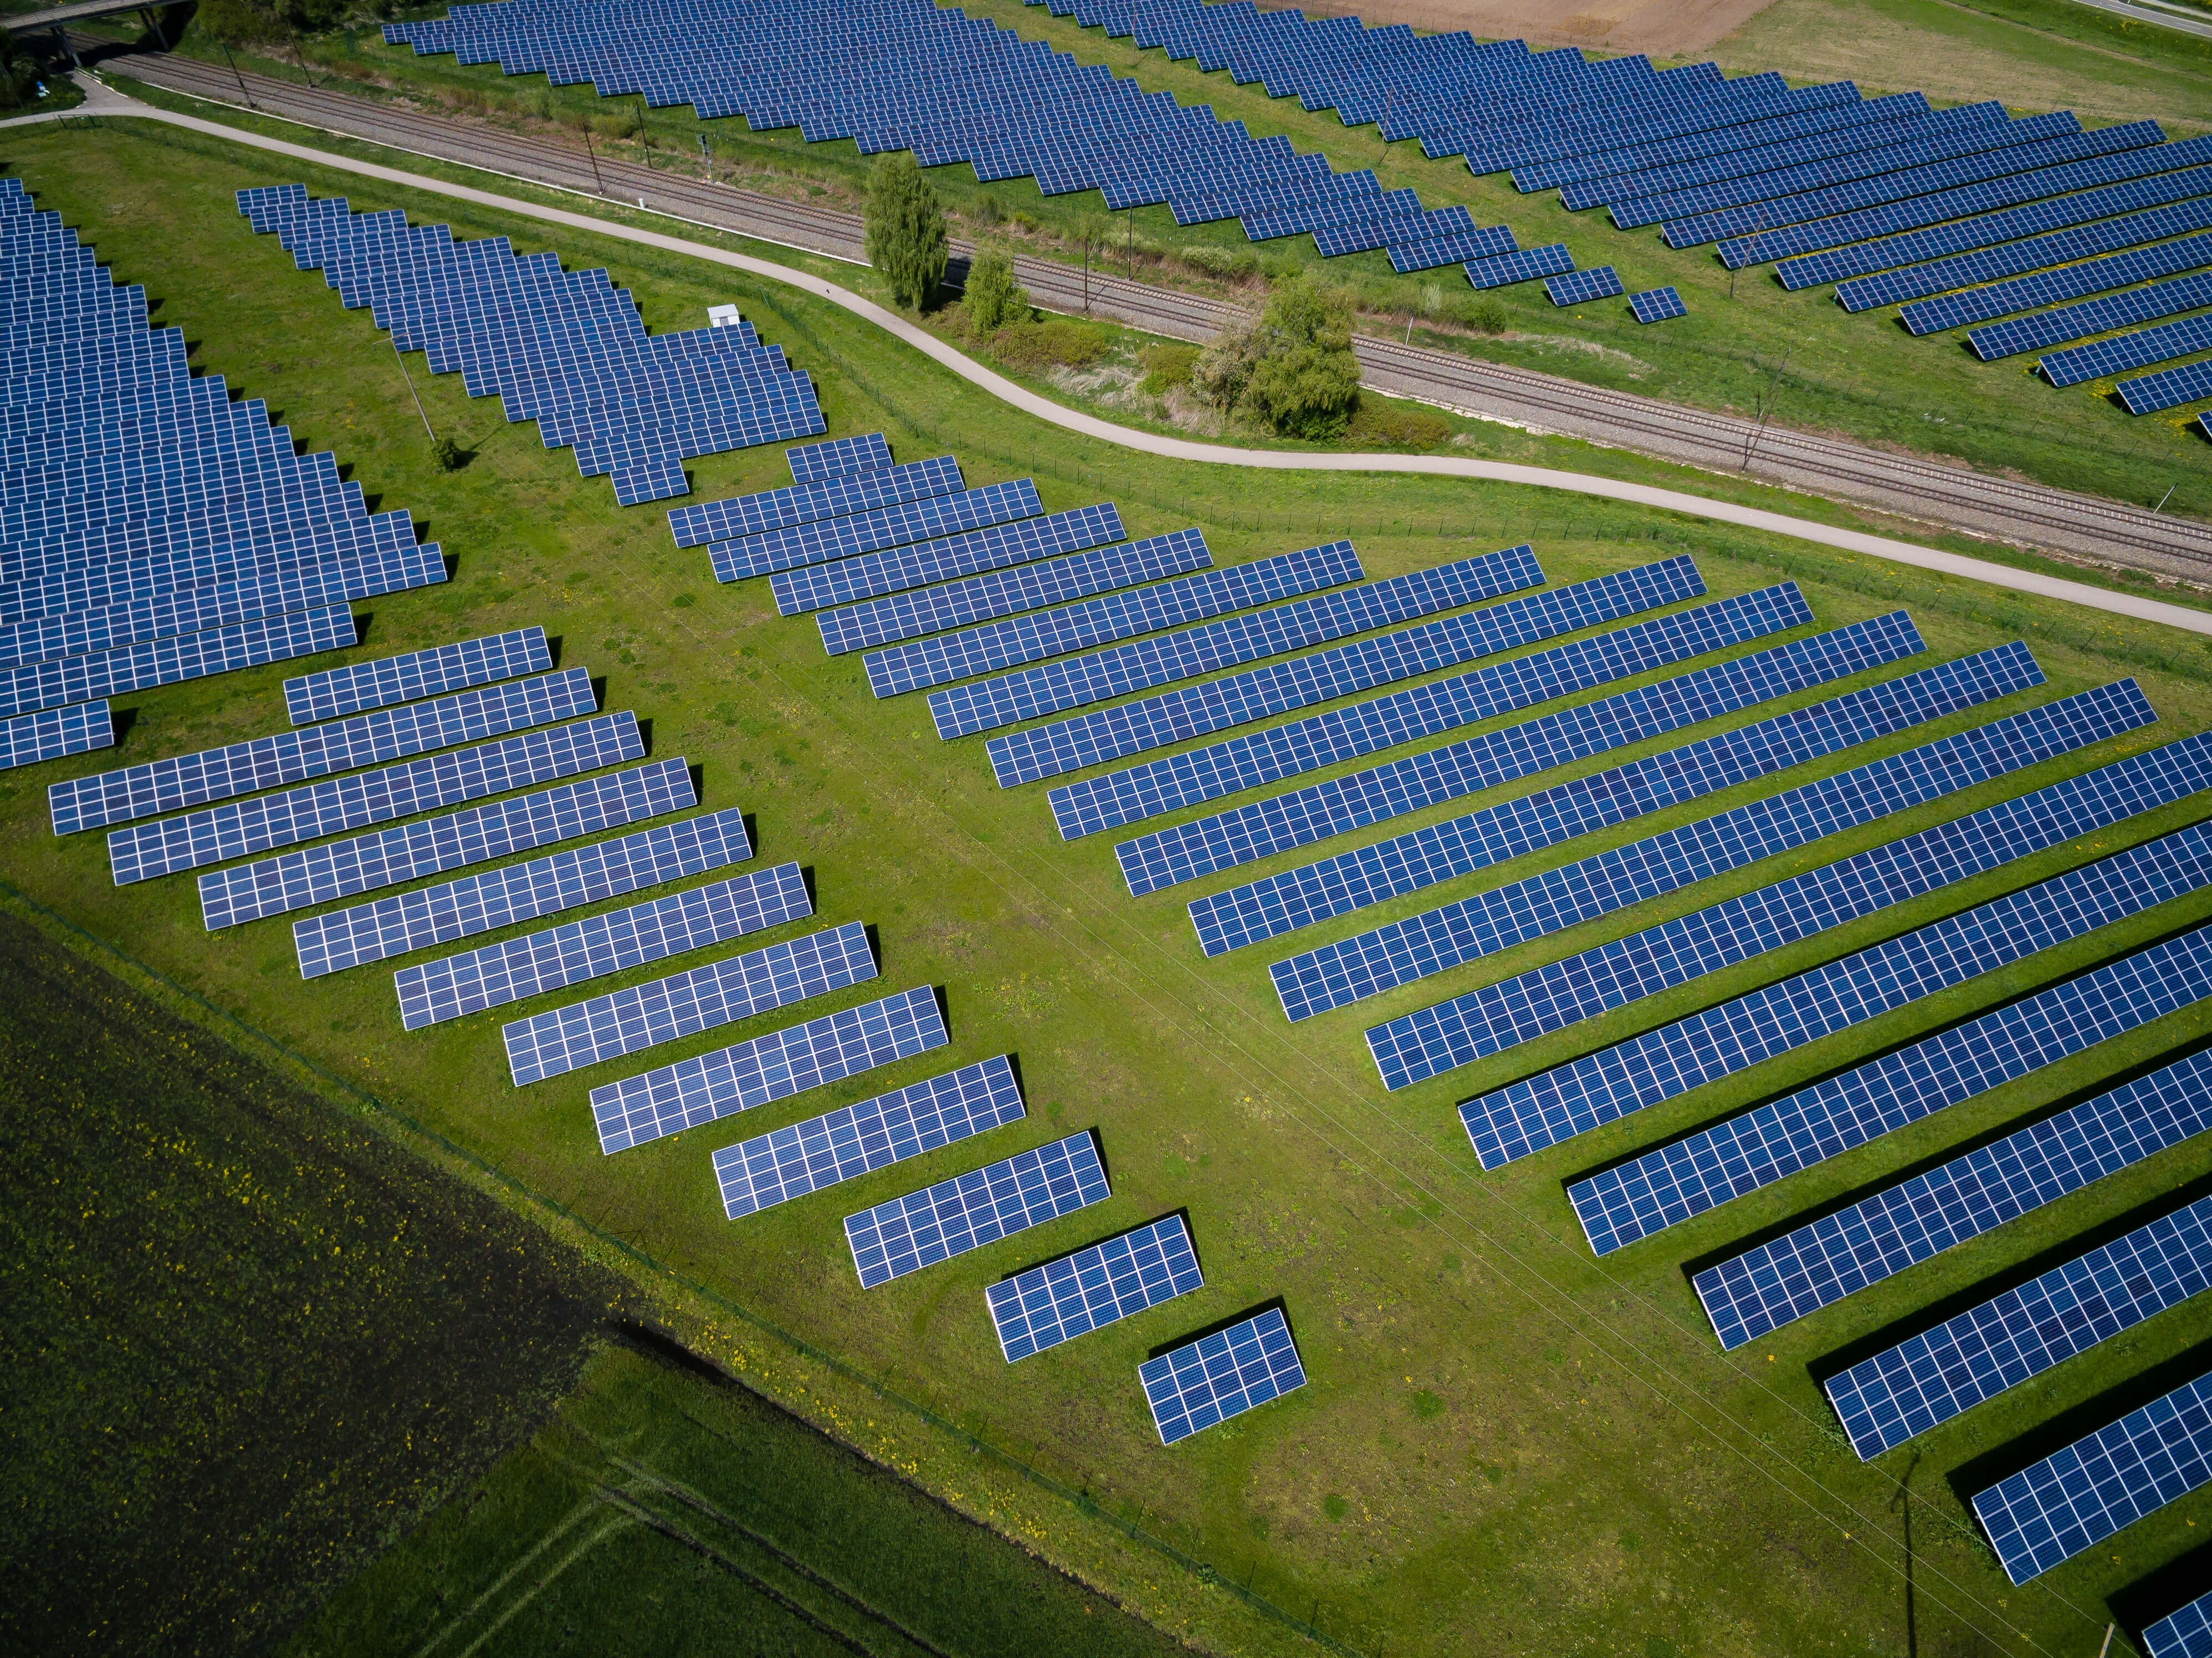 Overhead view of a field full of solar panels